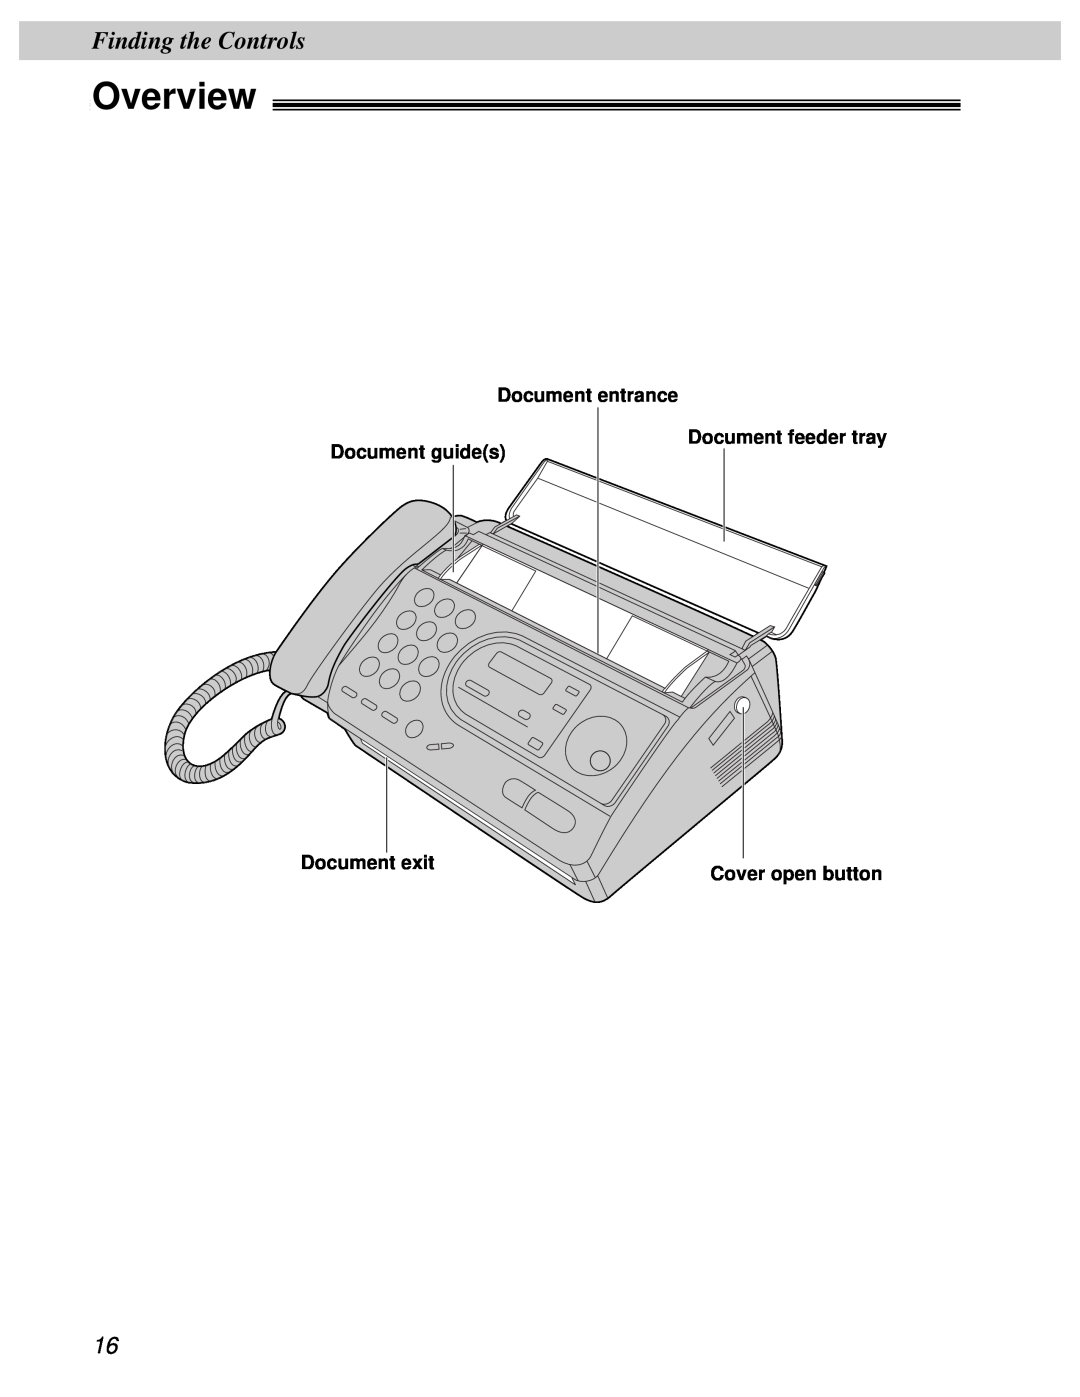 Panasonic KX-FT31BX quick start Overview, Finding the Controls, Document entrance, Document guides, Document feeder tray 